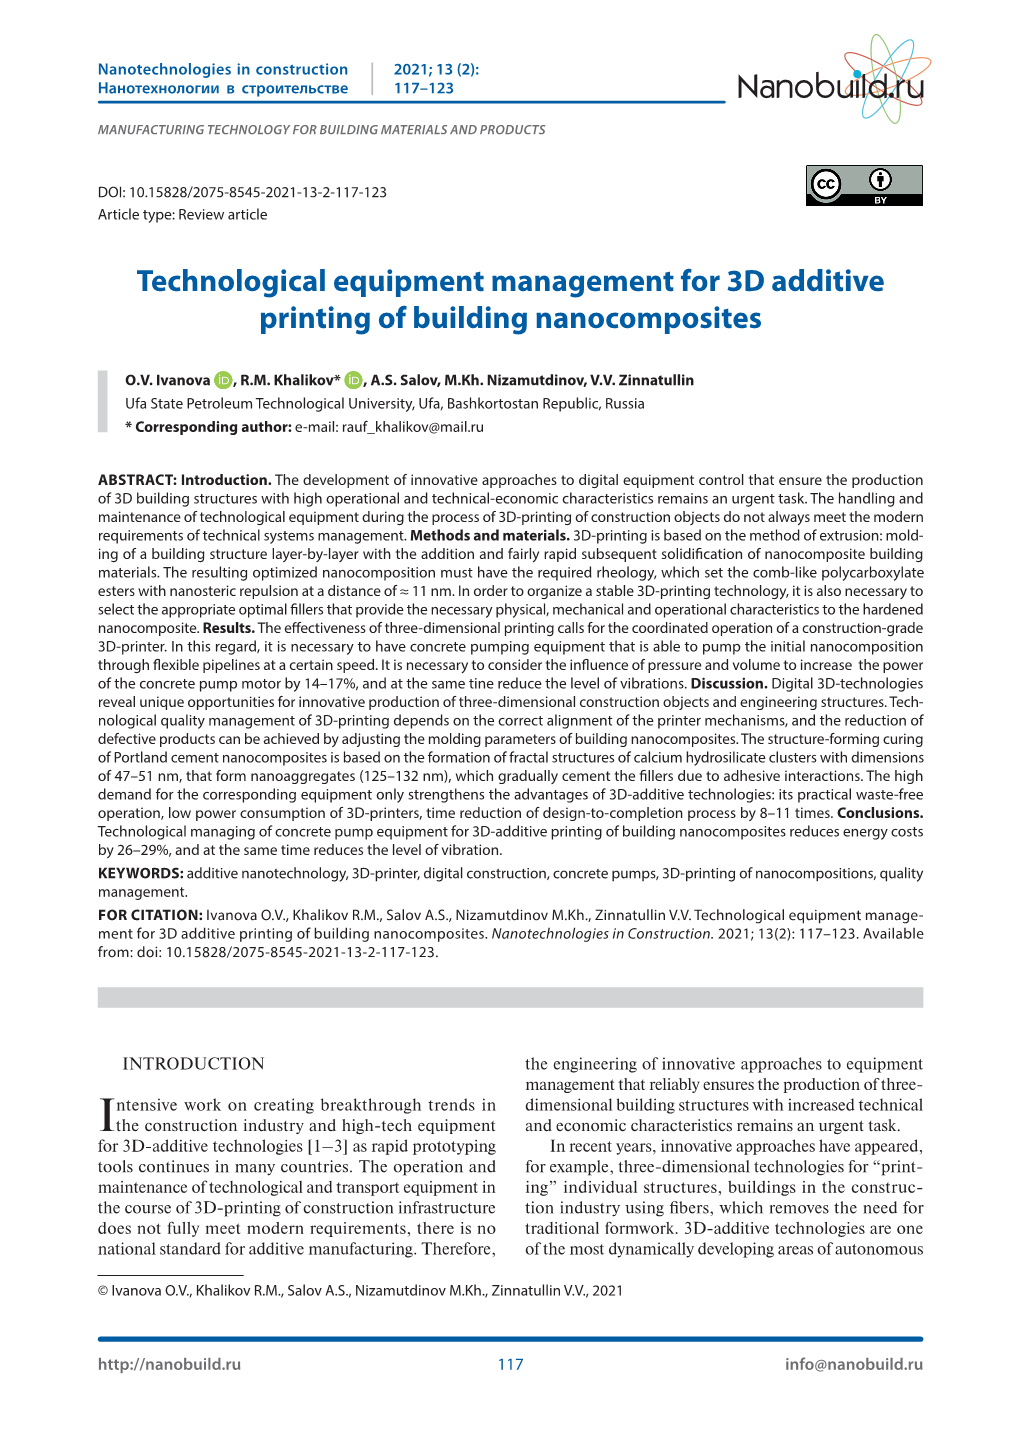 Technological Equipment Management for 3D Additive Printing of Building Nanocomposites